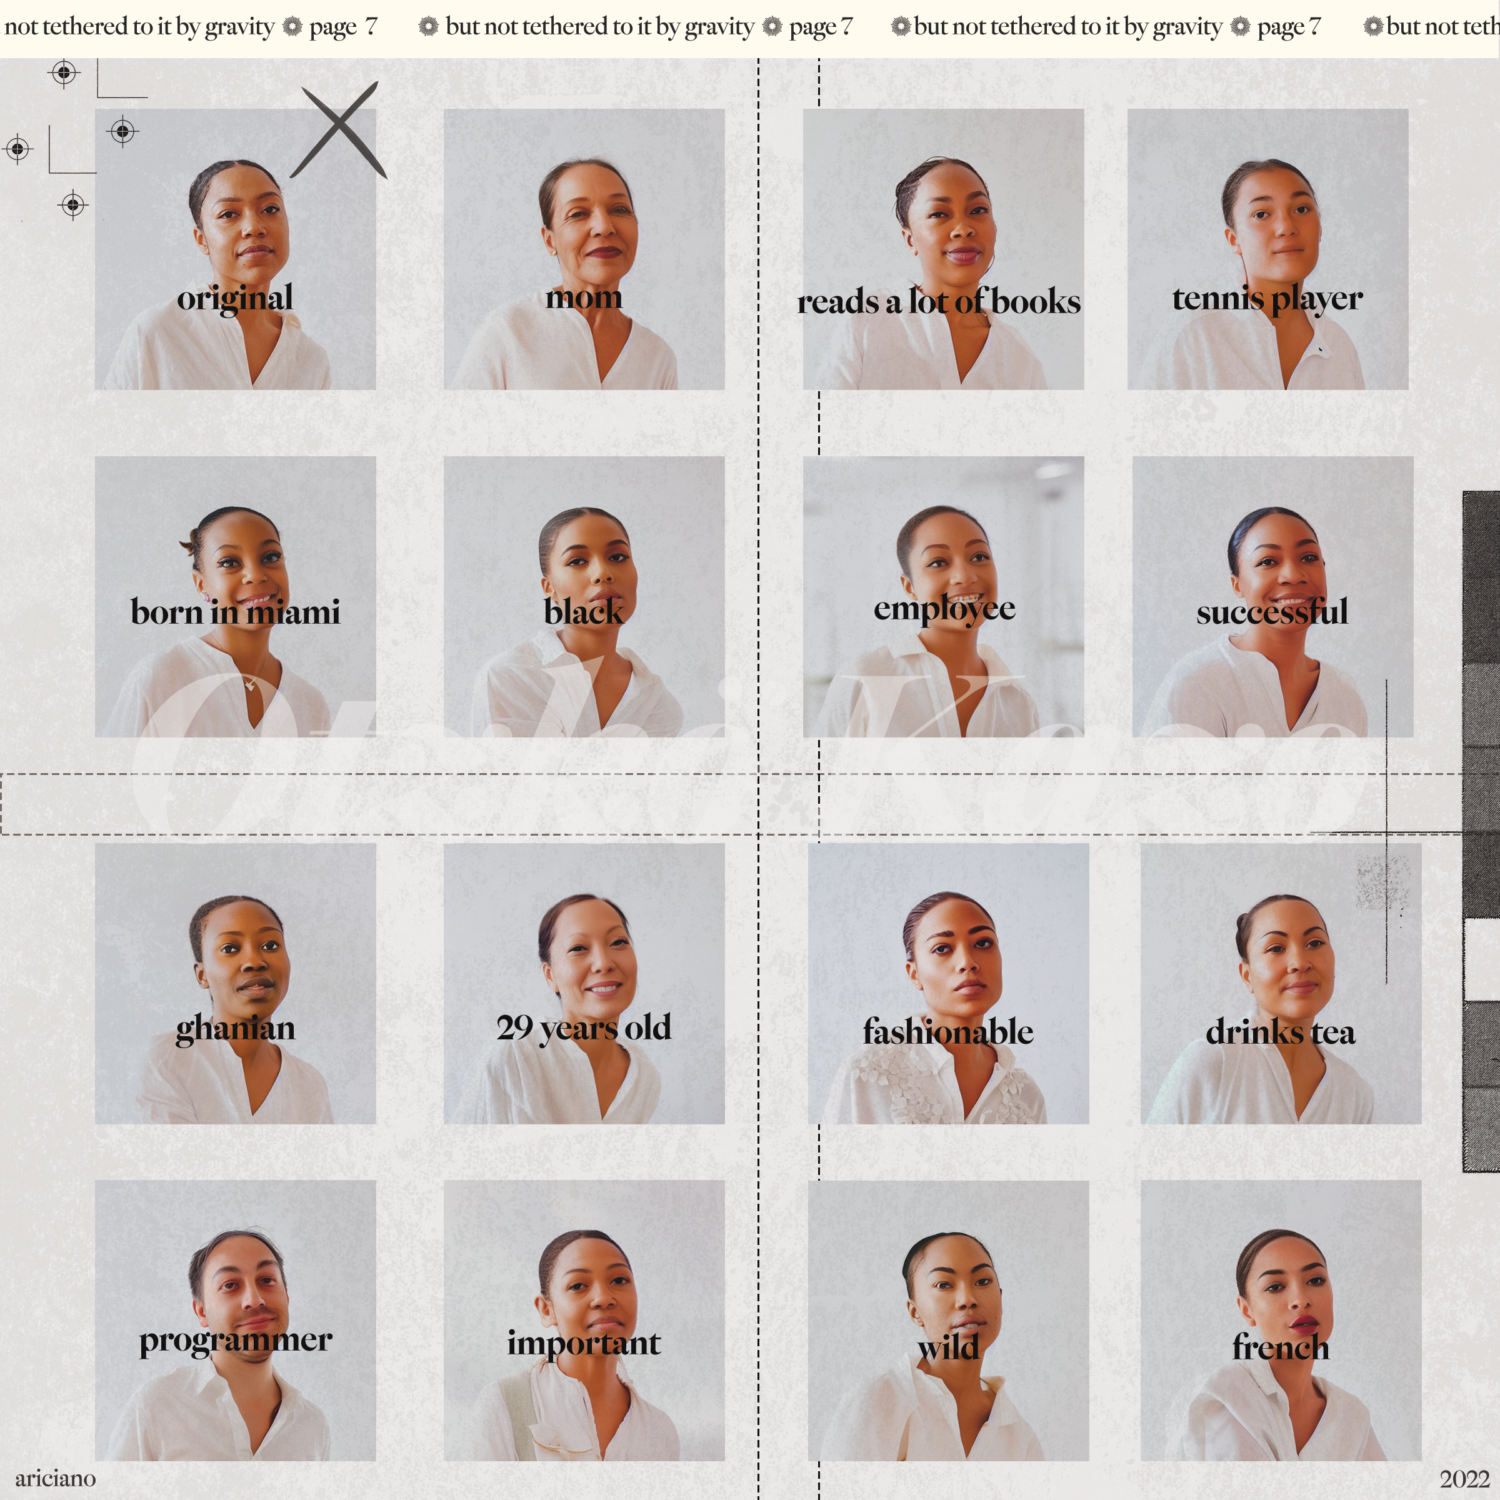 A grid of photographs of an Afro-Latinx woman with short black hair (artist Ari Melenciano) wearing a white shirt. Each photograph differs and has been manipulated using artificial intelligence. Text below each image identifies which physical traits have been changed.